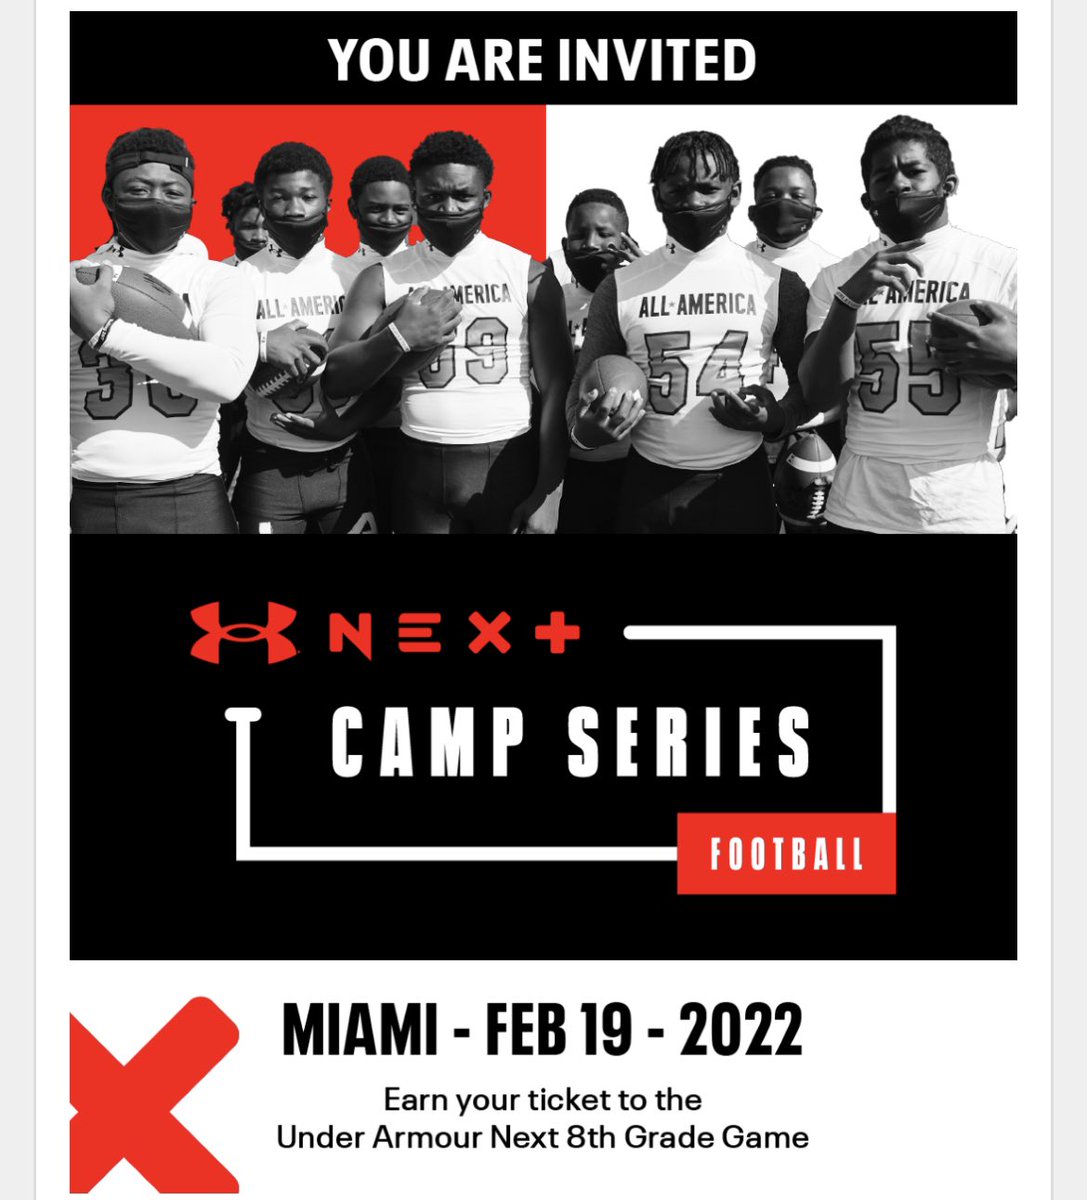 We are kicking off our MS camp series in Miami 🏝…. Invites has started going out!! #WeWill #UANextAA